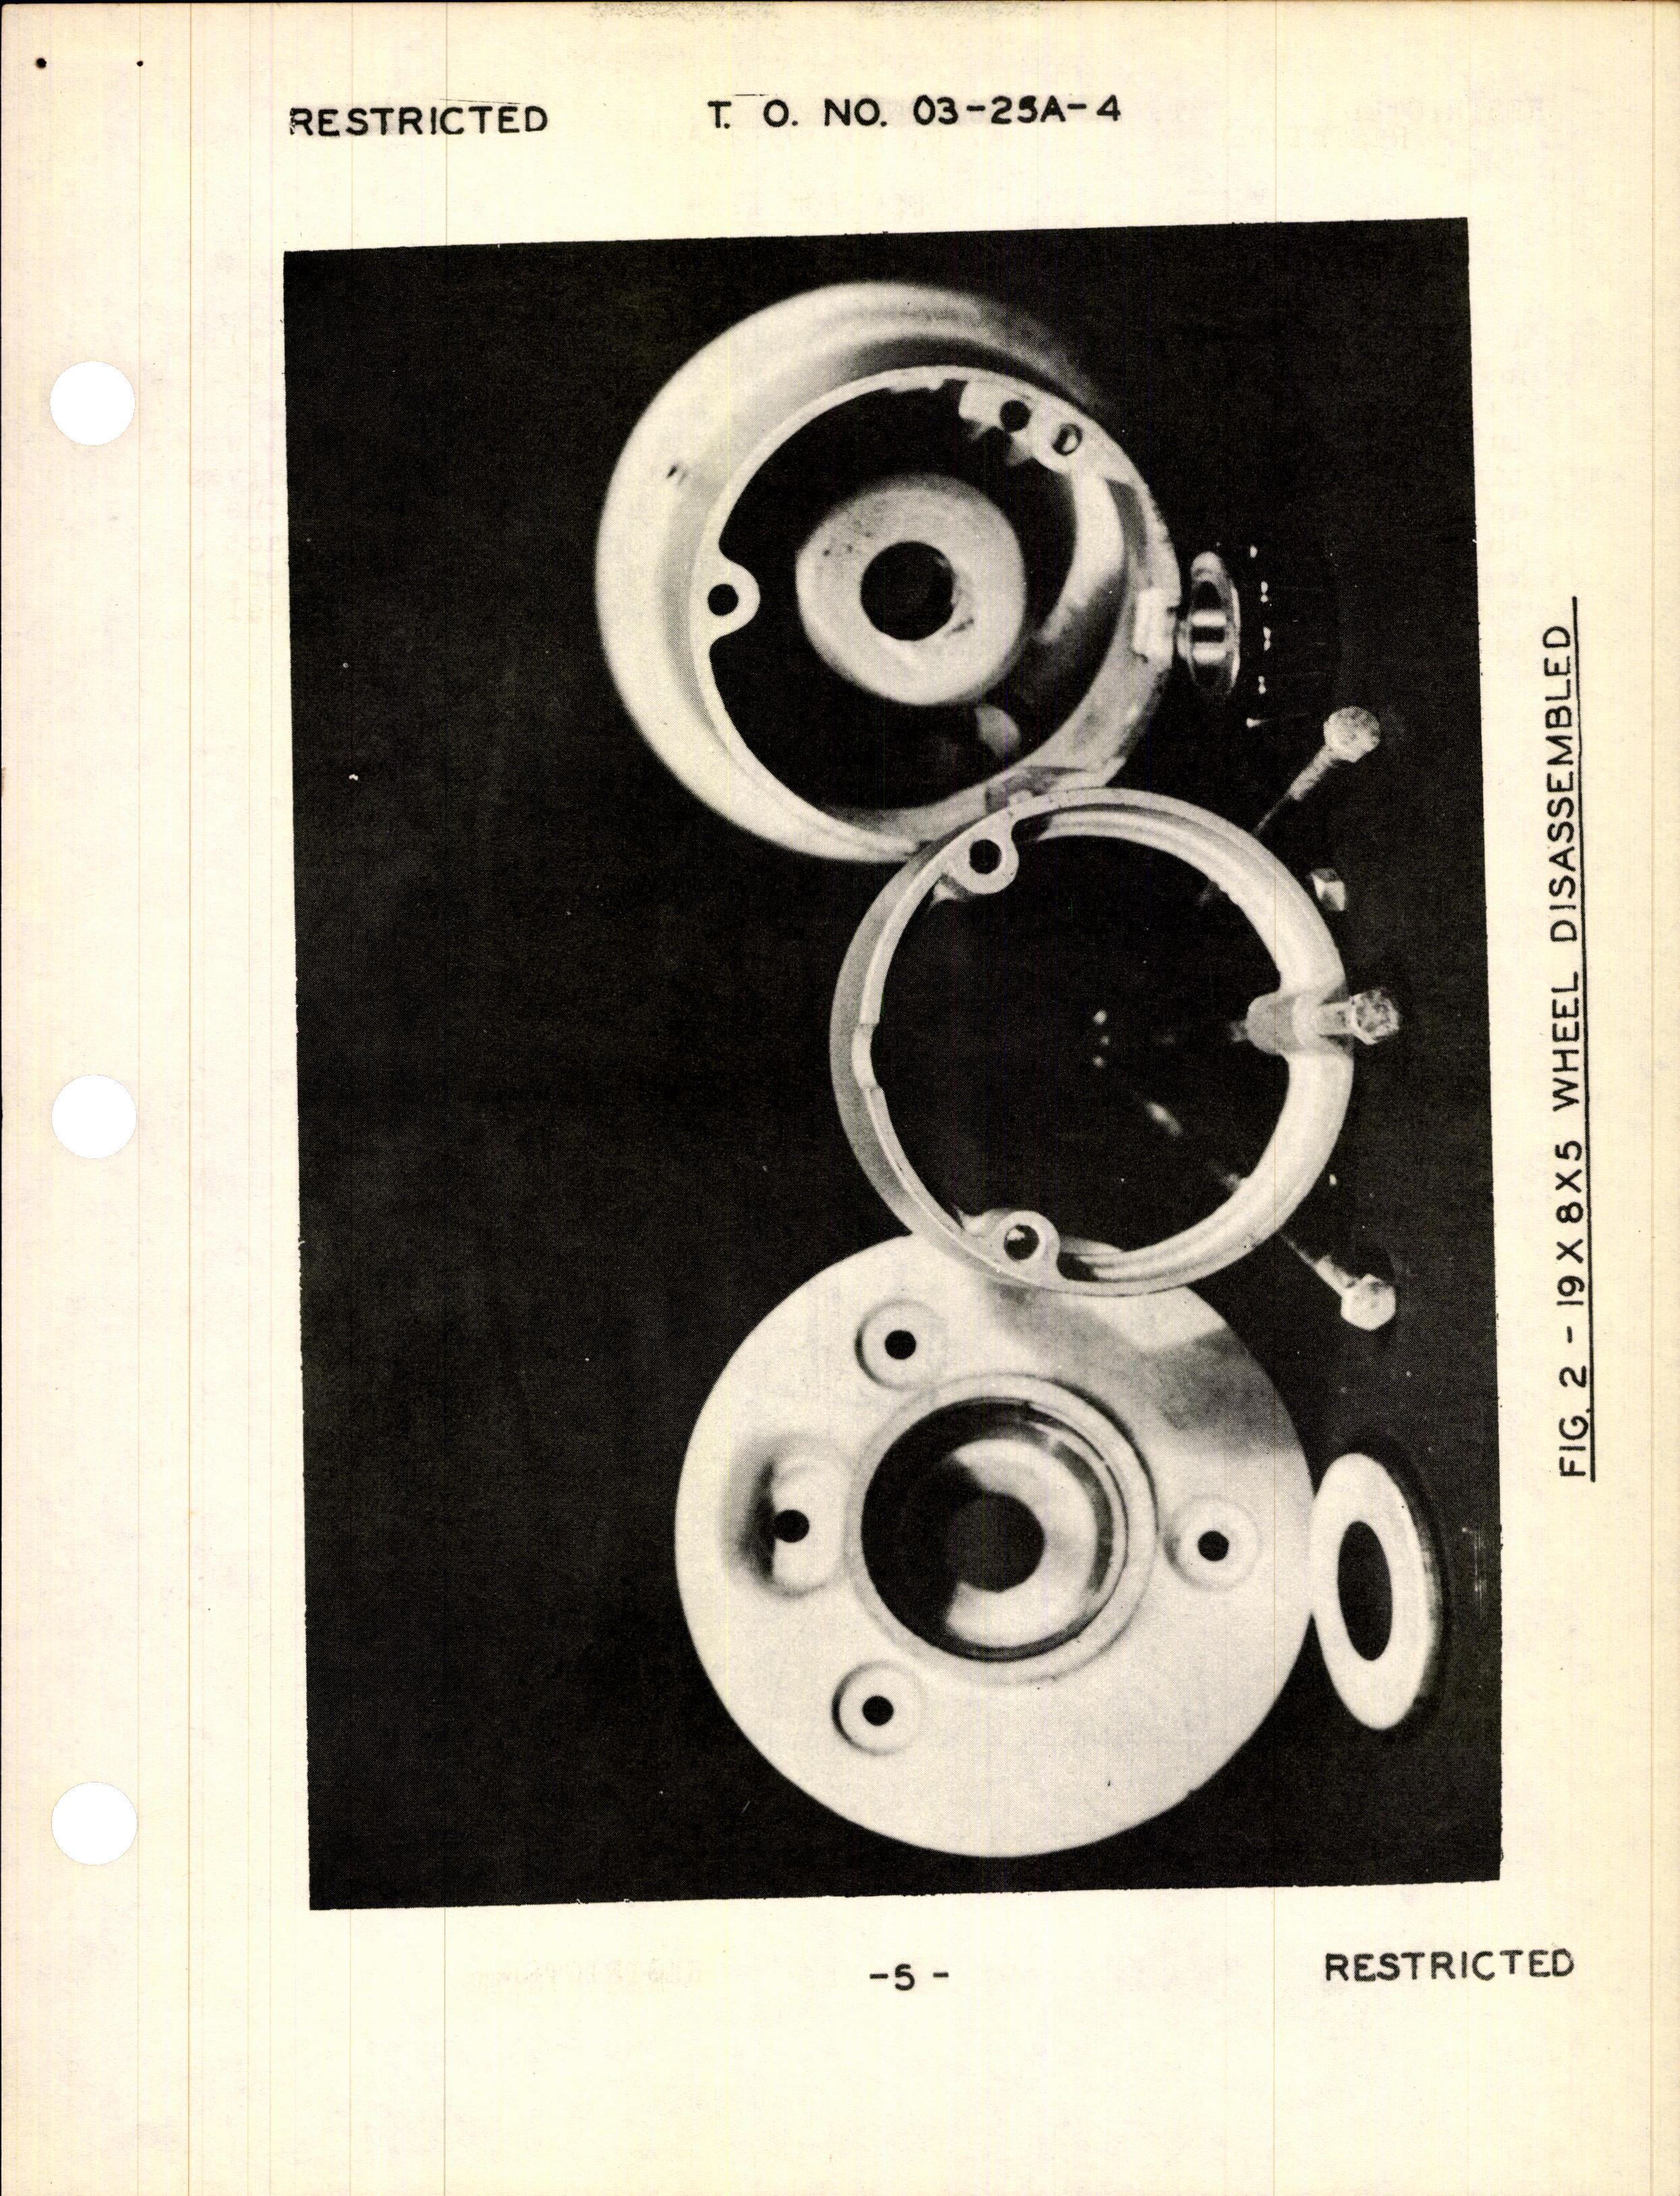 Sample page 7 from AirCorps Library document: Handbook of Instructions with Parts Catalog for Smooth Contour Tail Wheels